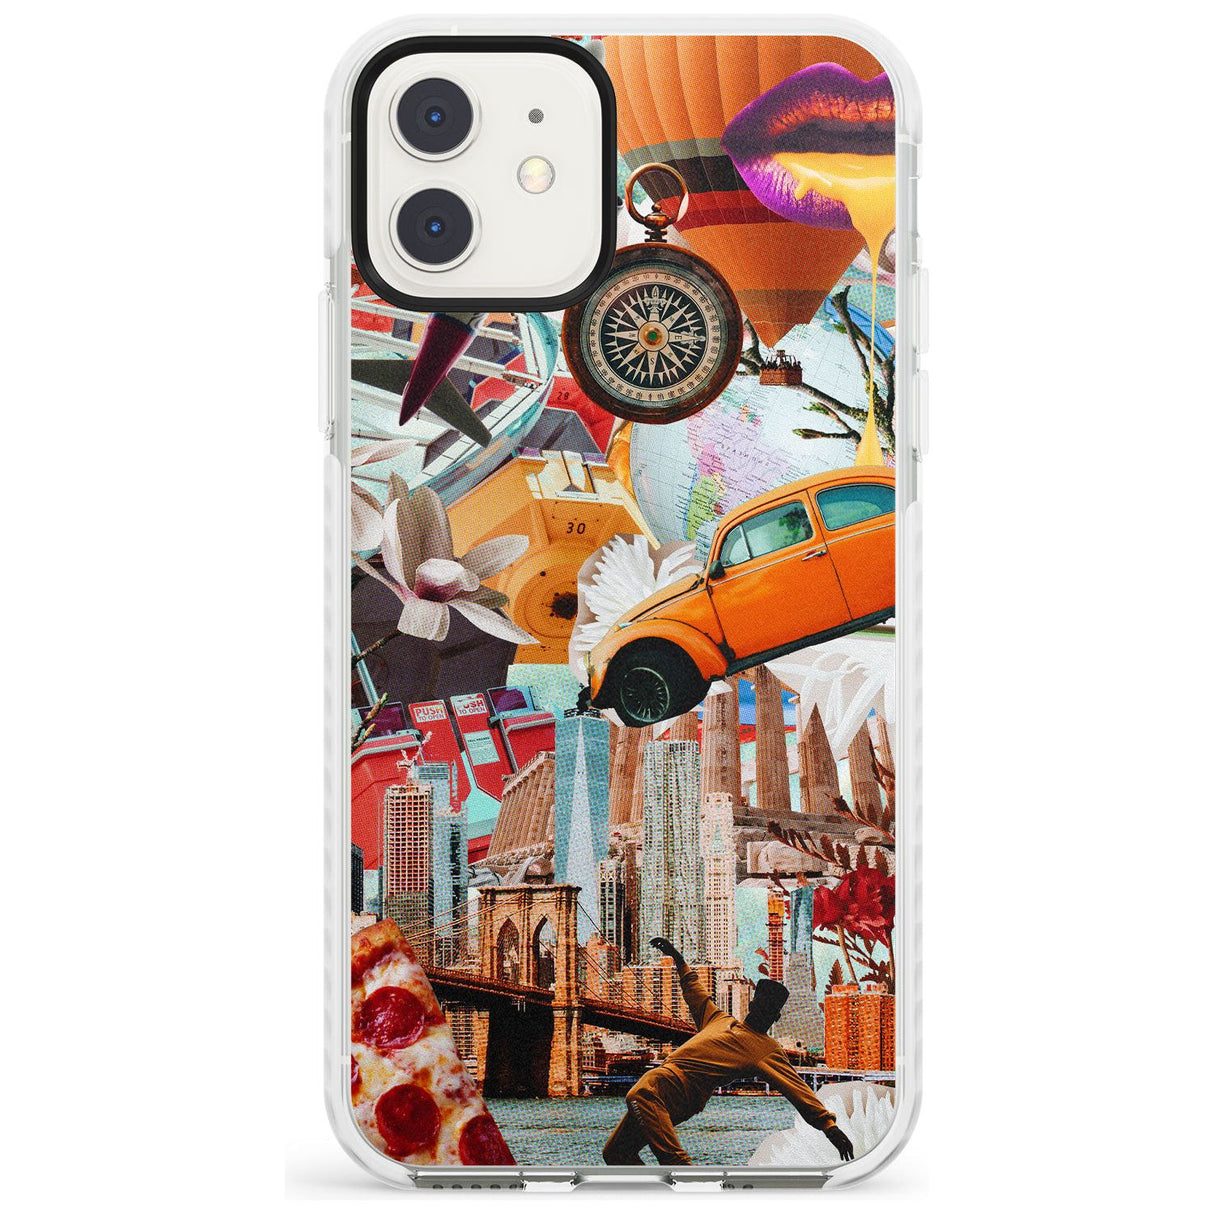 Vintage Collage: New York Mix Impact Phone Case for iPhone 11